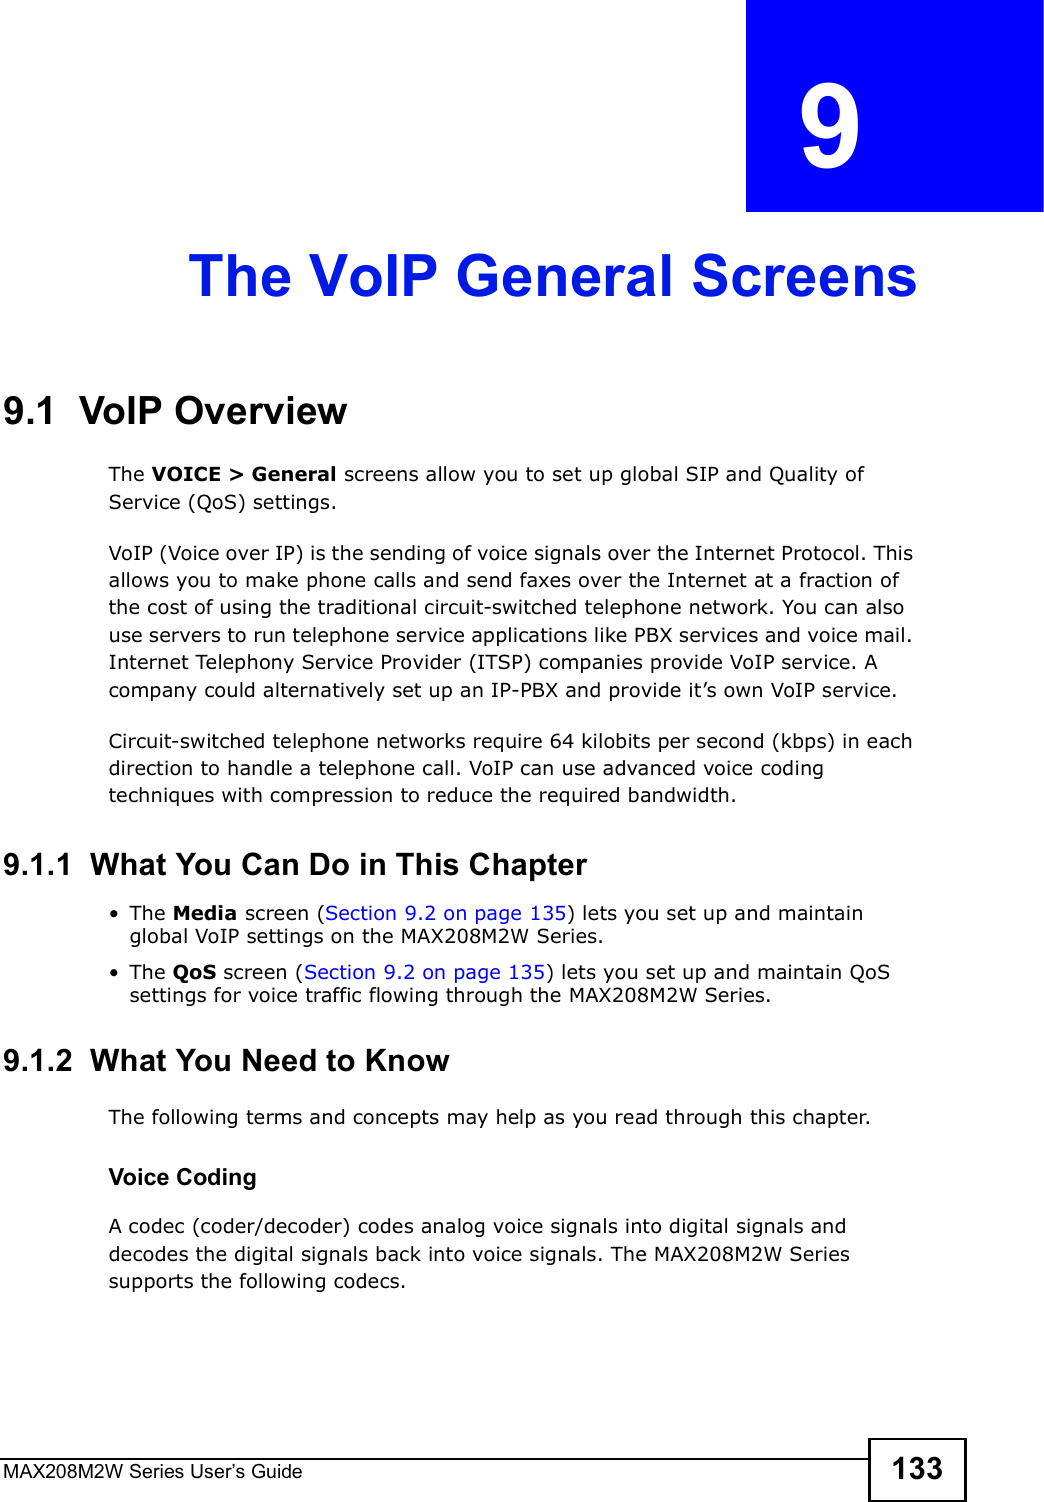 MAX208M2W Series User s Guide 133CHAPTER  9 The VoIP General Screens9.1  VoIP OverviewThe VOICE &gt; General screens allow you to set up global SIP and Quality of Service (QoS) settings.VoIP (Voice over IP) is the sending of voice signals over the Internet Protocol. This allows you to make phone calls and send faxes over the Internet at a fraction of the cost of using the traditional circuit-switched telephone network. You can also use servers to run telephone service applications like PBX services and voice mail. Internet Telephony Service Provider (ITSP) companies provide VoIP service. A company could alternatively set up an IP-PBX and provide it s own VoIP service.Circuit-switched telephone networks require 64 kilobits per second (kbps) in each direction to handle a telephone call. VoIP can use advanced voice coding techniques with compression to reduce the required bandwidth.9.1.1  What You Can Do in This Chapter!The Media screen (Section 9.2 on page 135) lets you set up and maintain global VoIP settings on the MAX208M2W Series.!The QoS screen (Section 9.2 on page 135) lets you set up and maintain QoS settings for voice traffic flowing through the MAX208M2W Series.9.1.2  What You Need to KnowThe following terms and concepts may help as you read through this chapter.Voice CodingA codec (coder/decoder) codes analog voice signals into digital signals and decodes the digital signals back into voice signals. The MAX208M2W Series supports the following codecs.